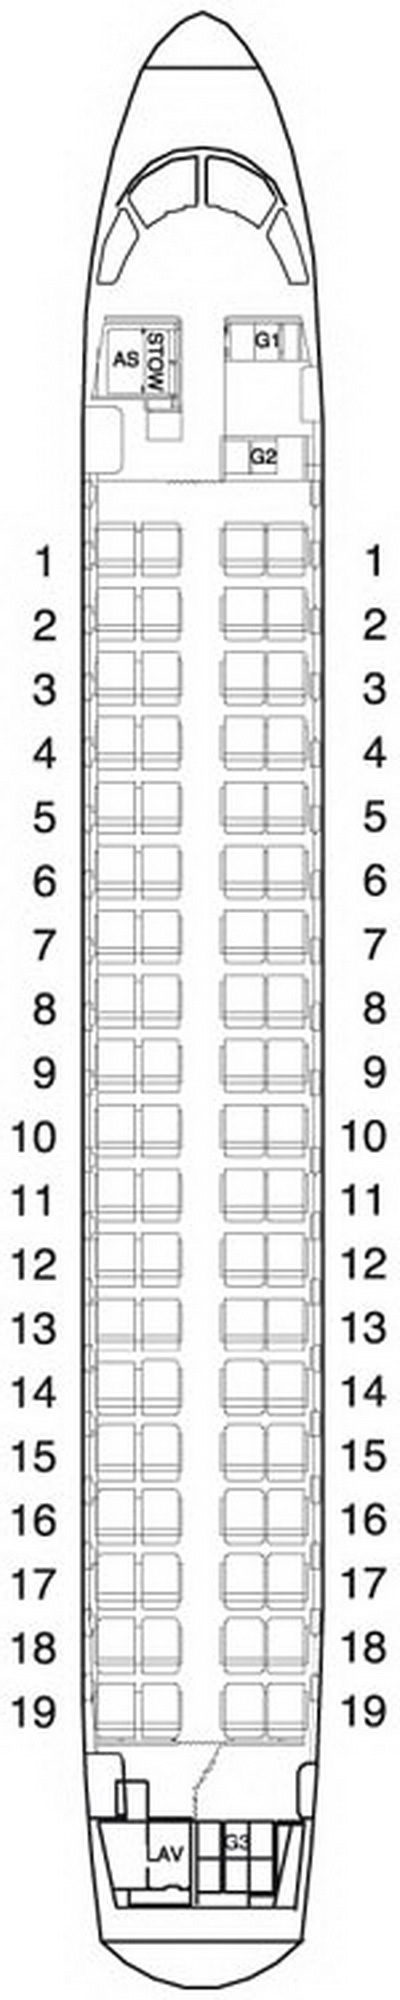 FINNAIR AIRLINES EMBRAER 170 AIRCRAFT SEATING CHART